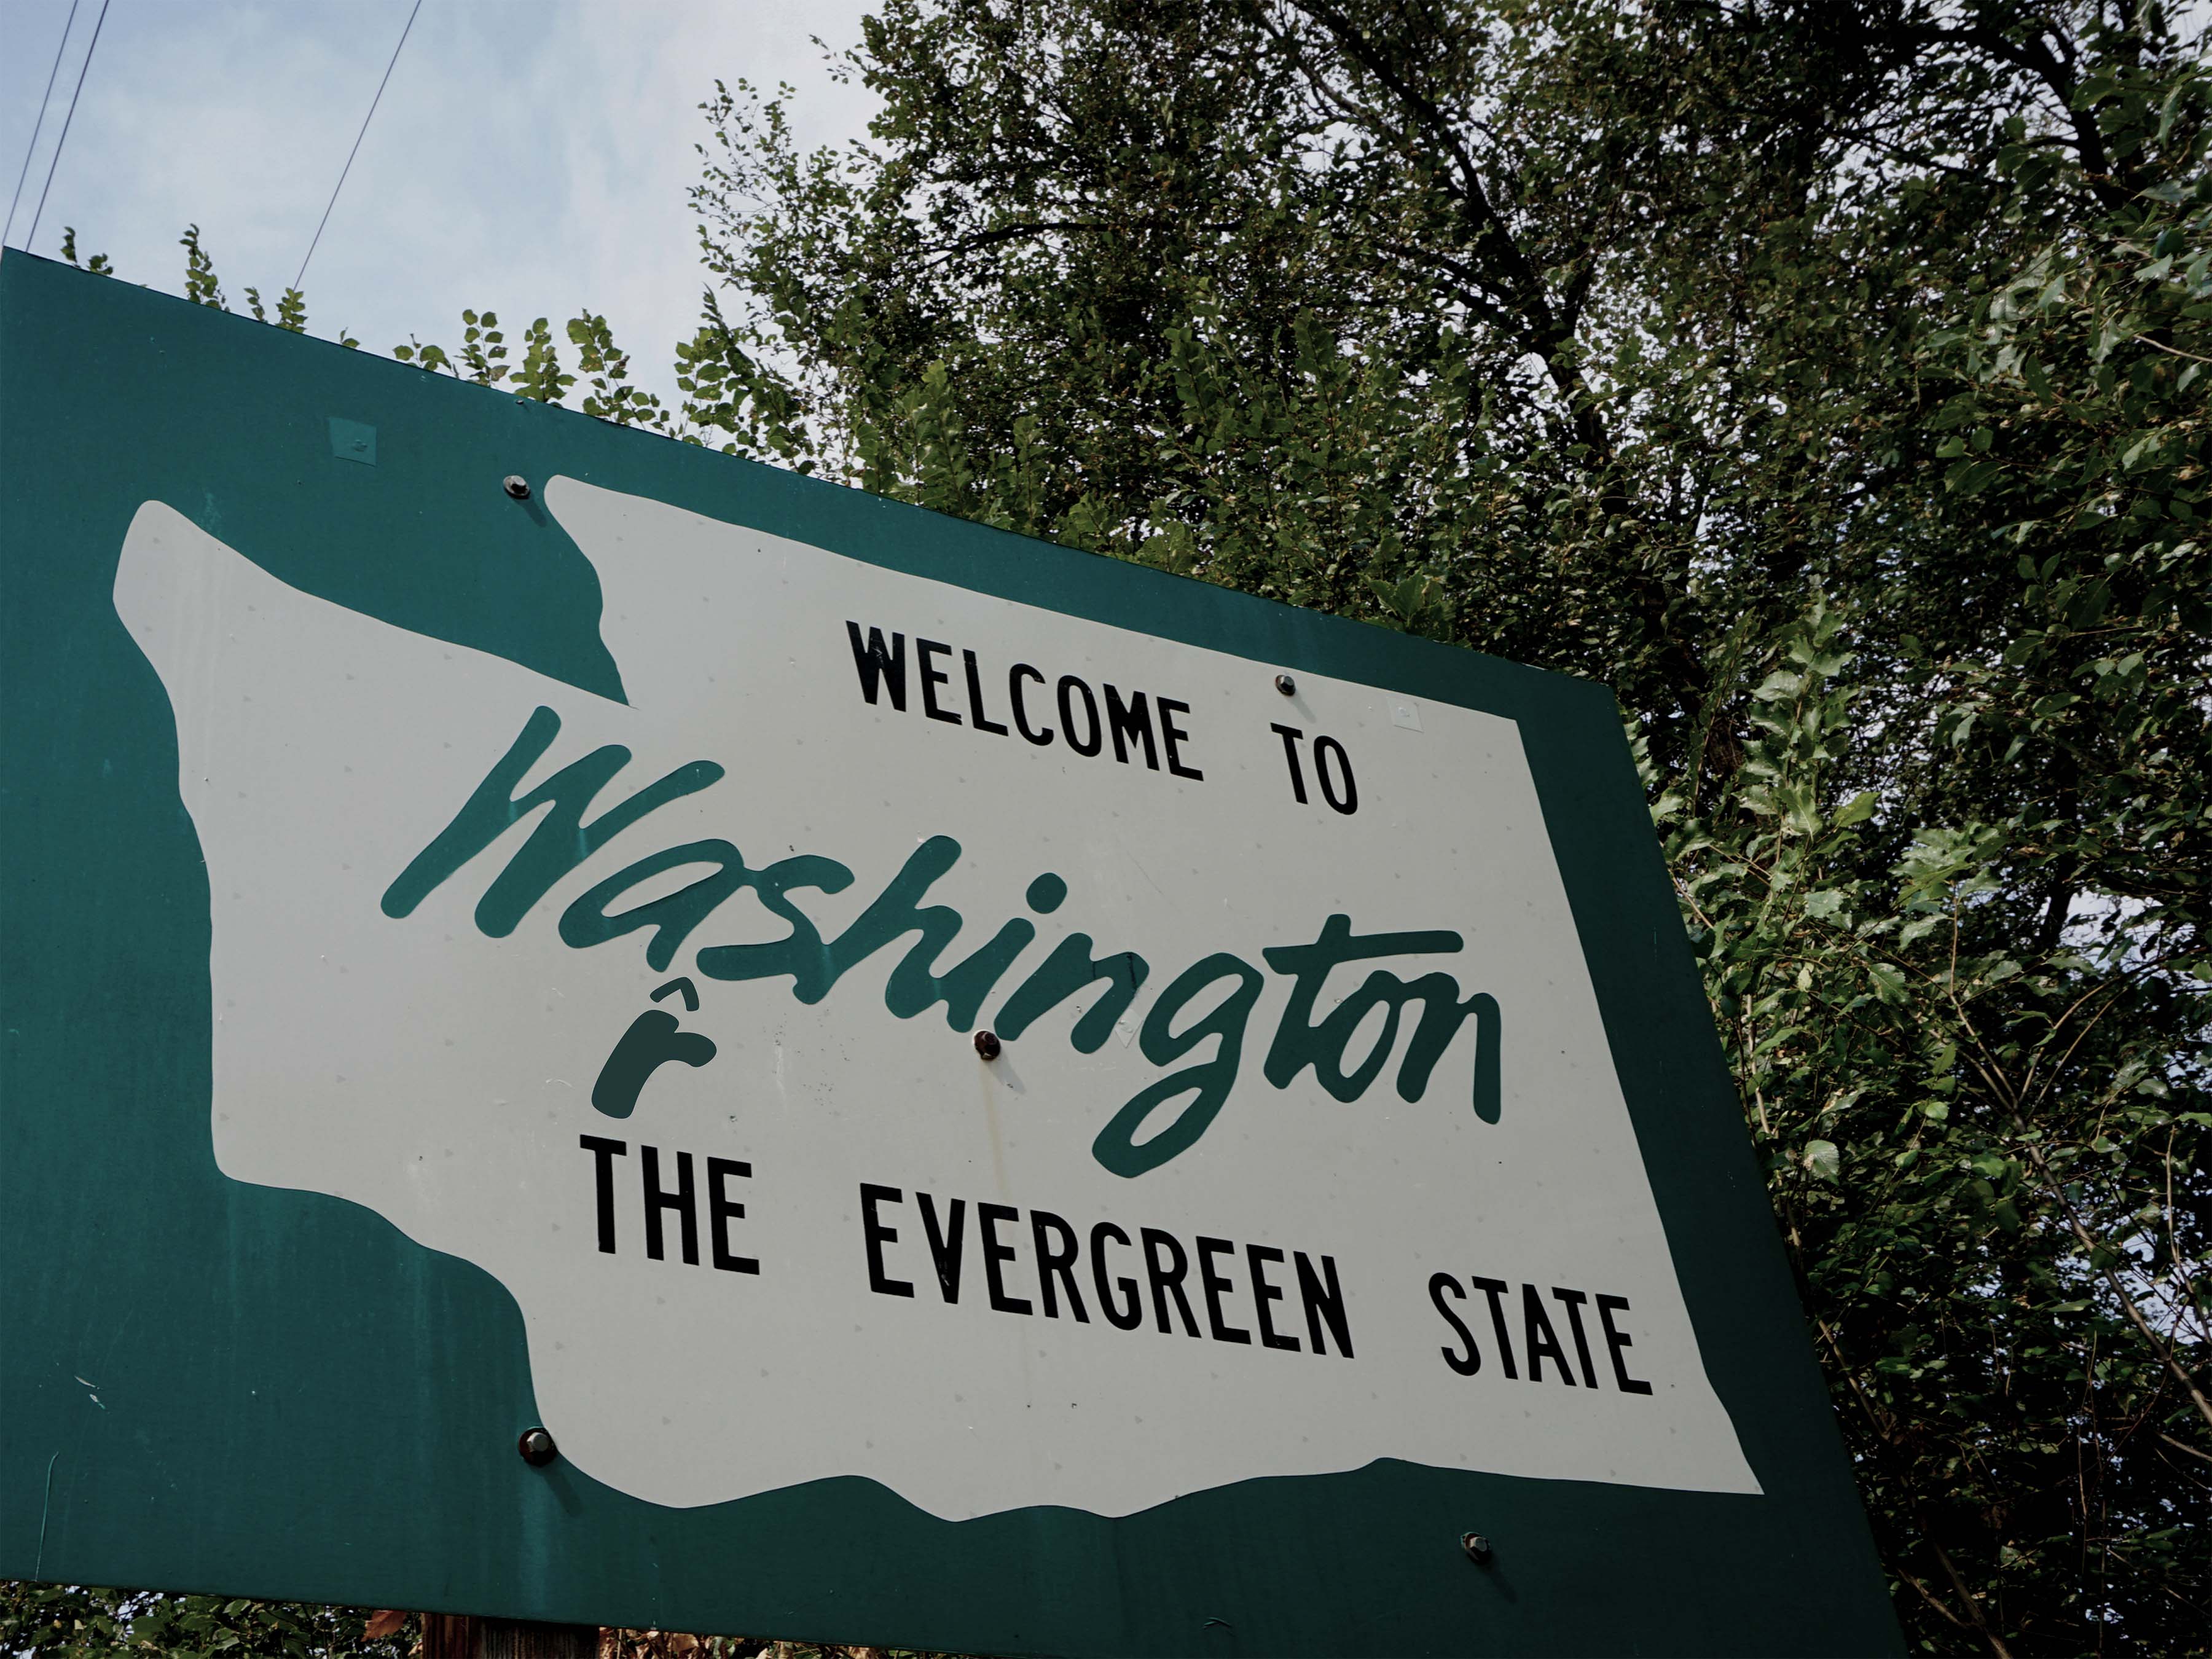 Welcome to Washington (Warshington), the Evergreen State. Click on image to see full description.